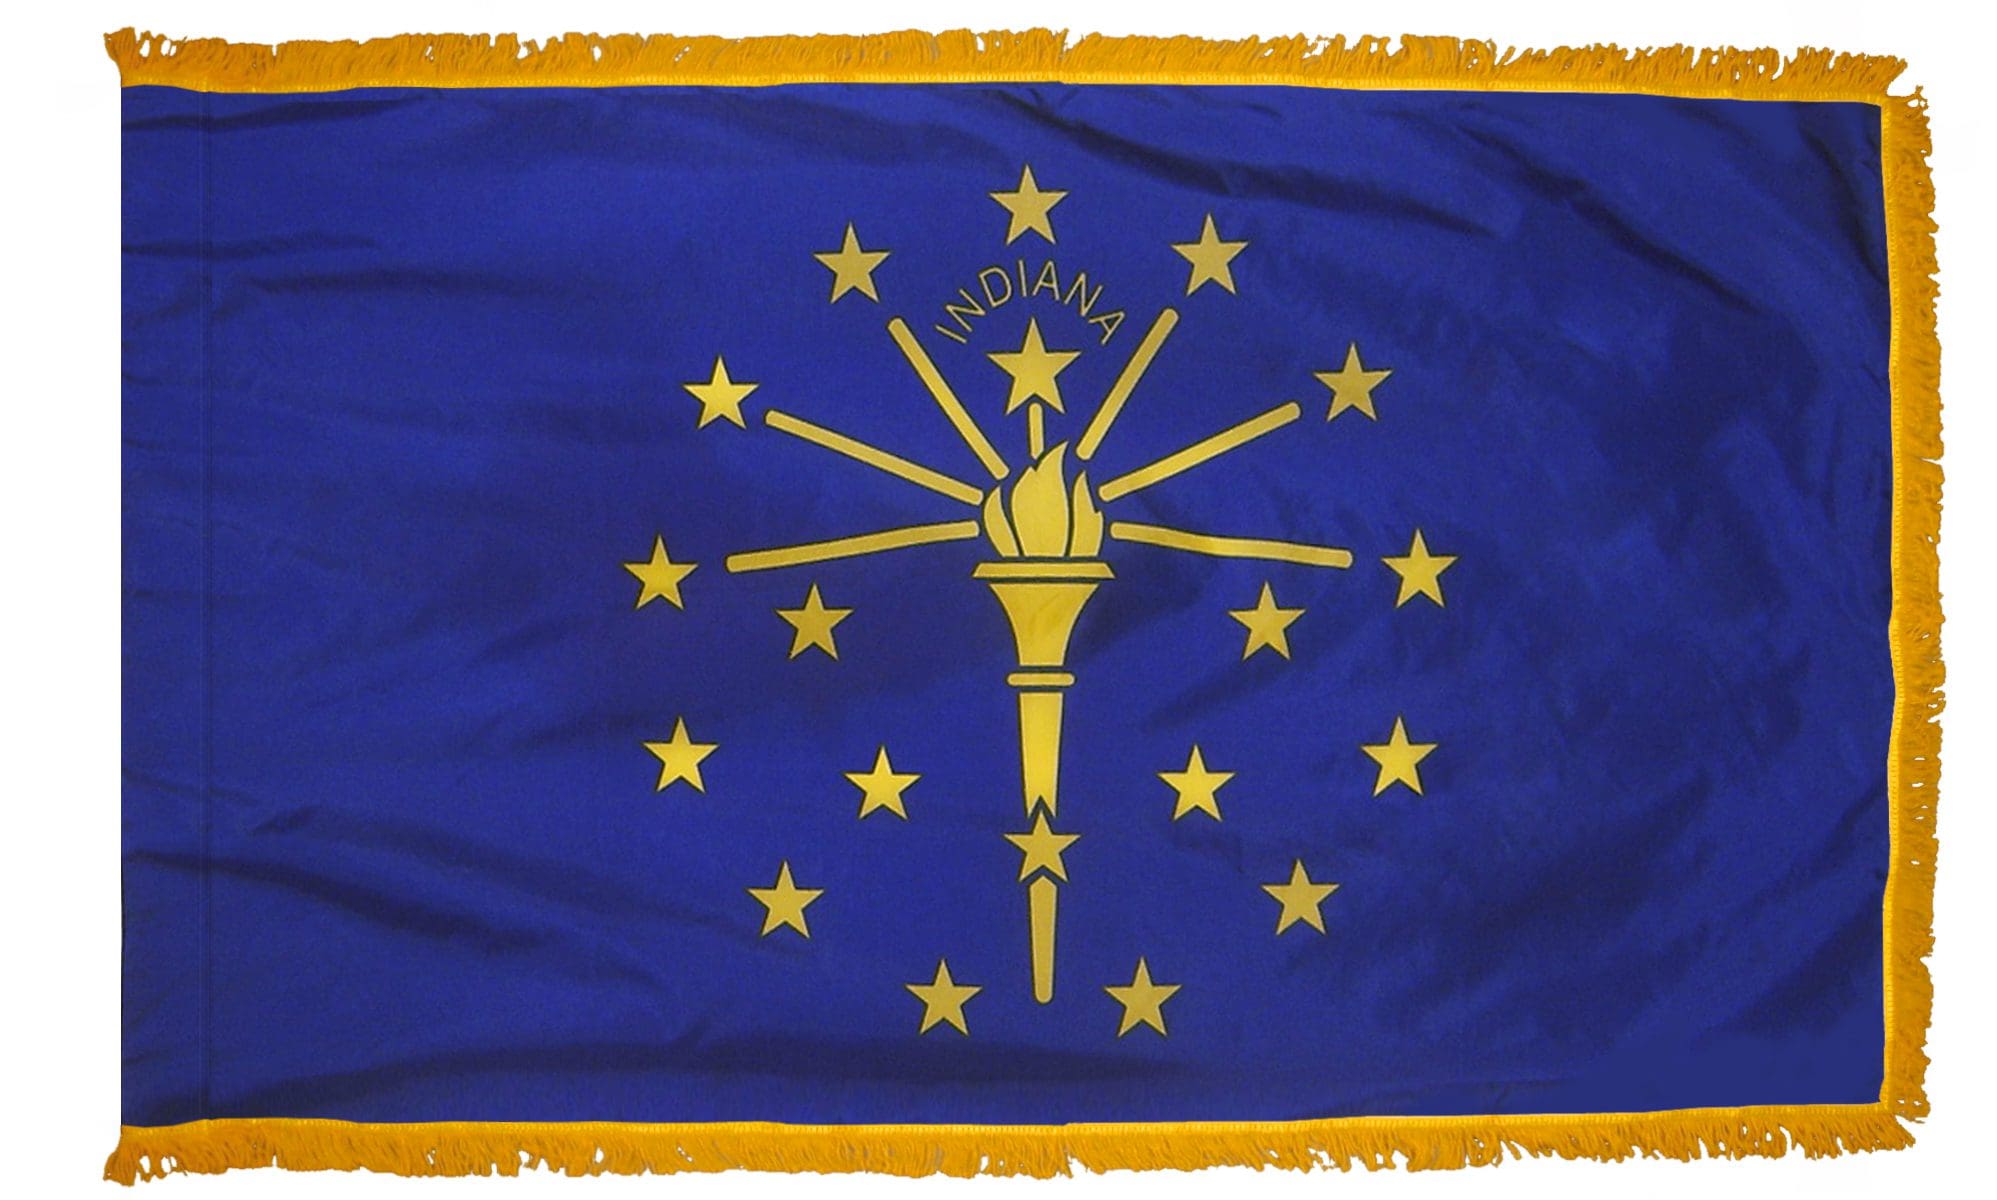 Indiana State Flag 3x5 or 4x6 ft. (fringed)